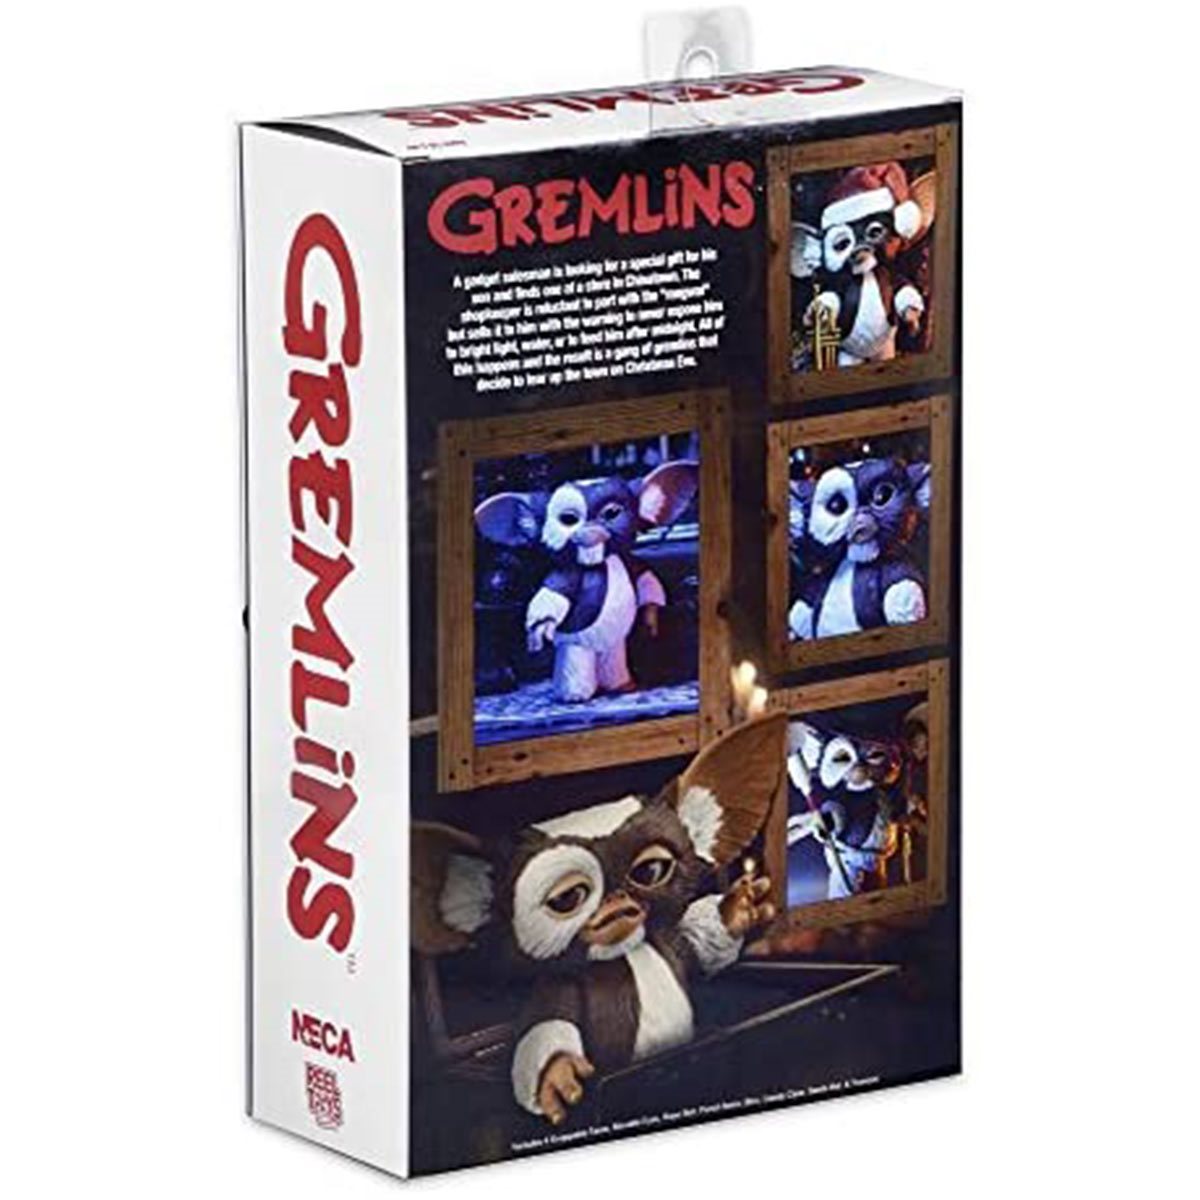 Gremlins - 7 Scale Action Figure - Ultimate Flasher - Collectors Row Inc.